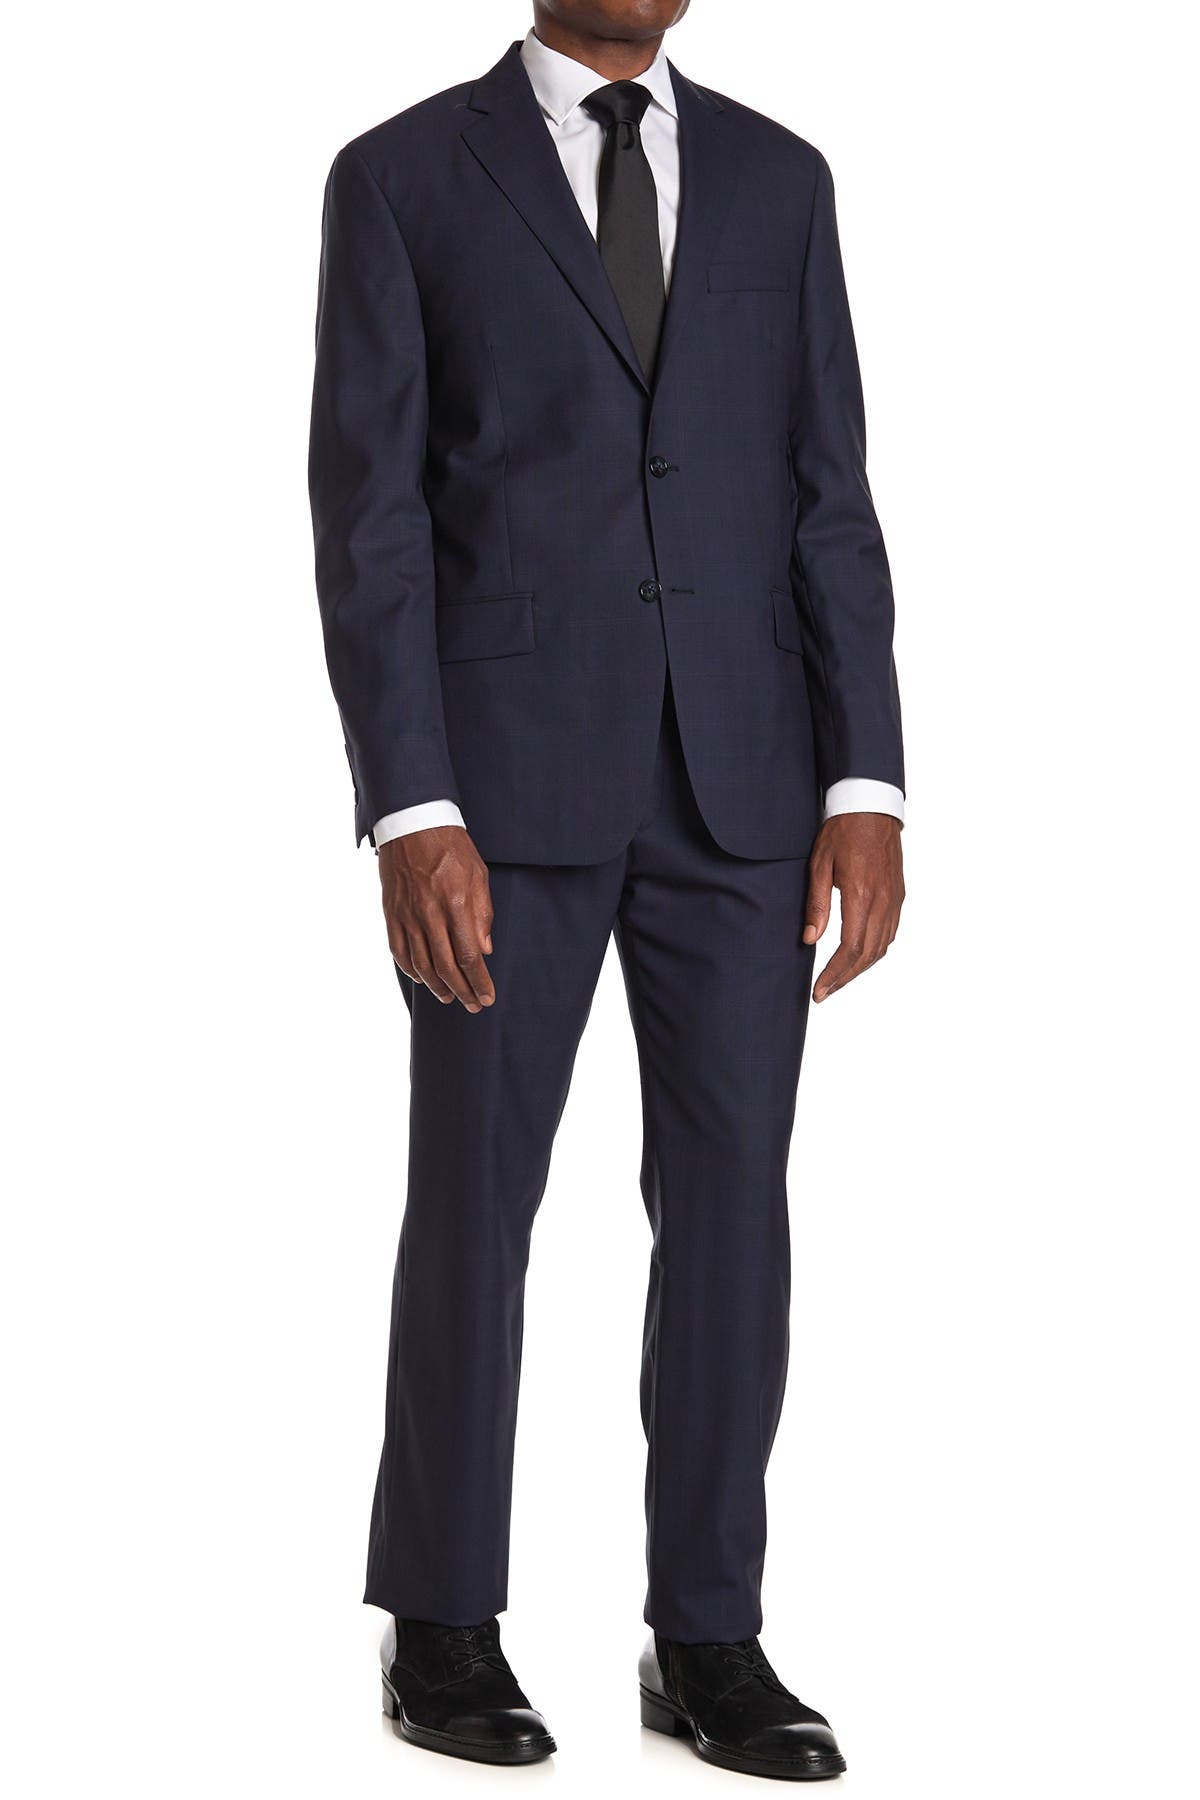 HART SCHAFFNER MARX NAVY RED WINDOWPANE NEW YORK TWO BUTTON NOTCH LAPEL NEW YORK FIT SUIT,887096720476